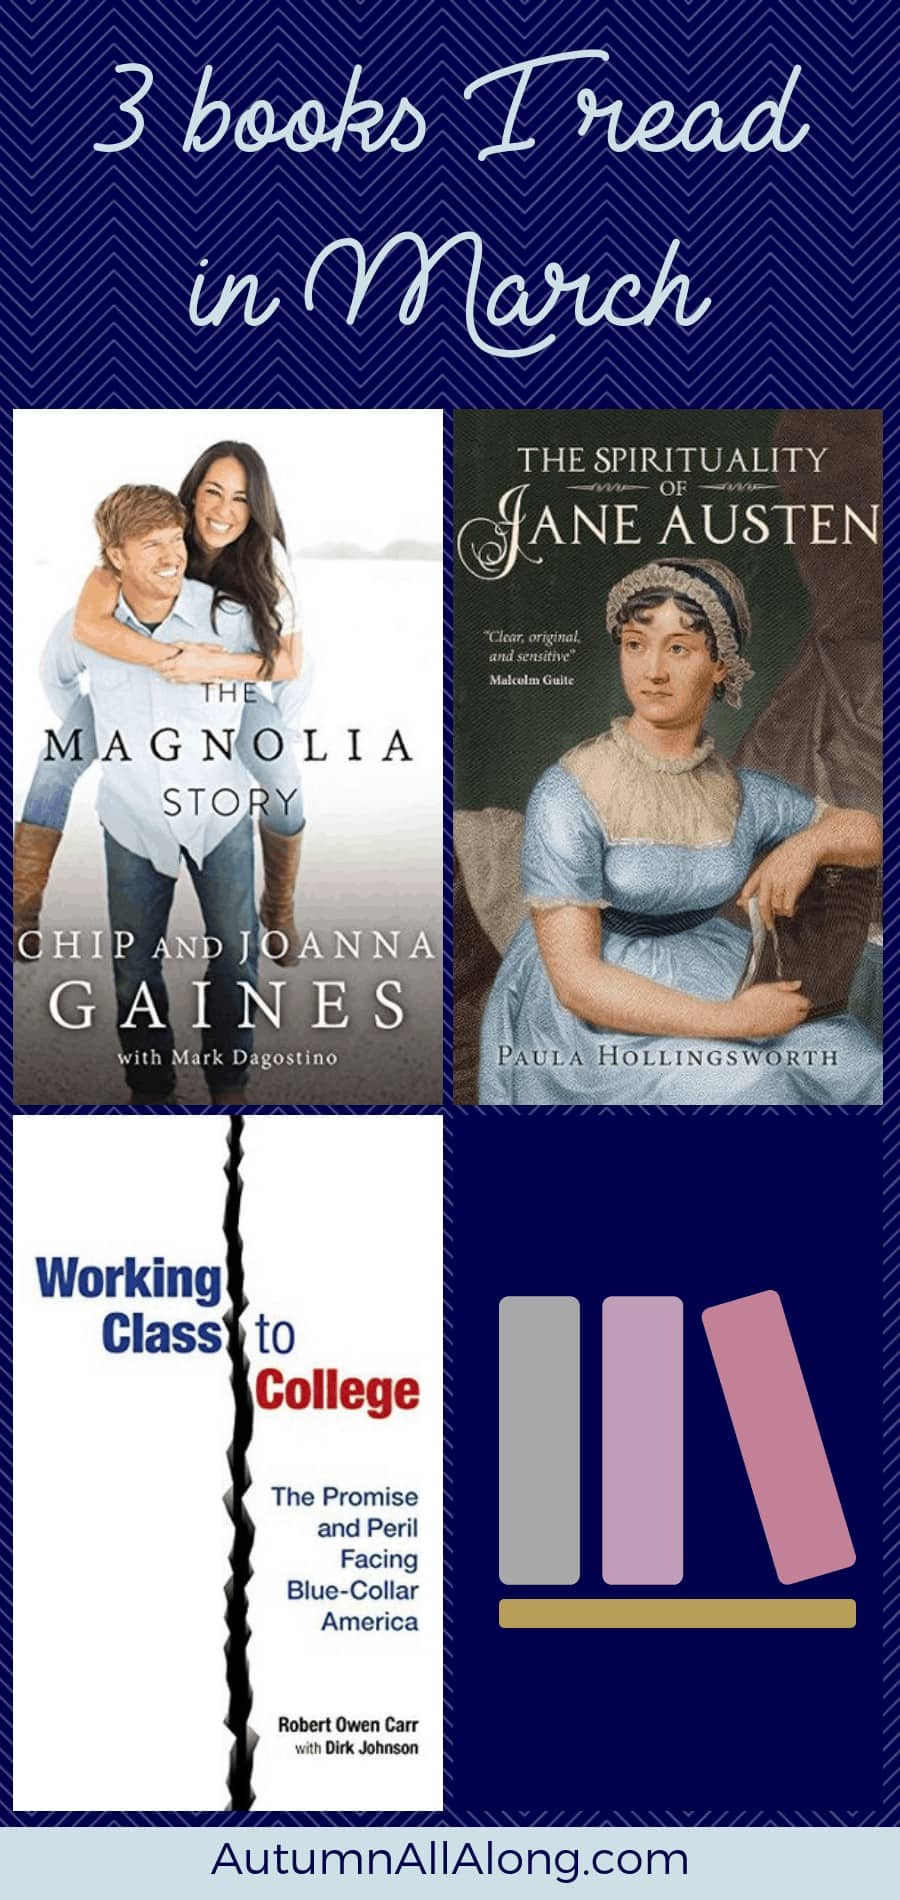 These are the books I read in March. Reviews on: The Spirituality of Jane Austen, The Magnolia Story, and Working Class to College. | via Autumn All Along